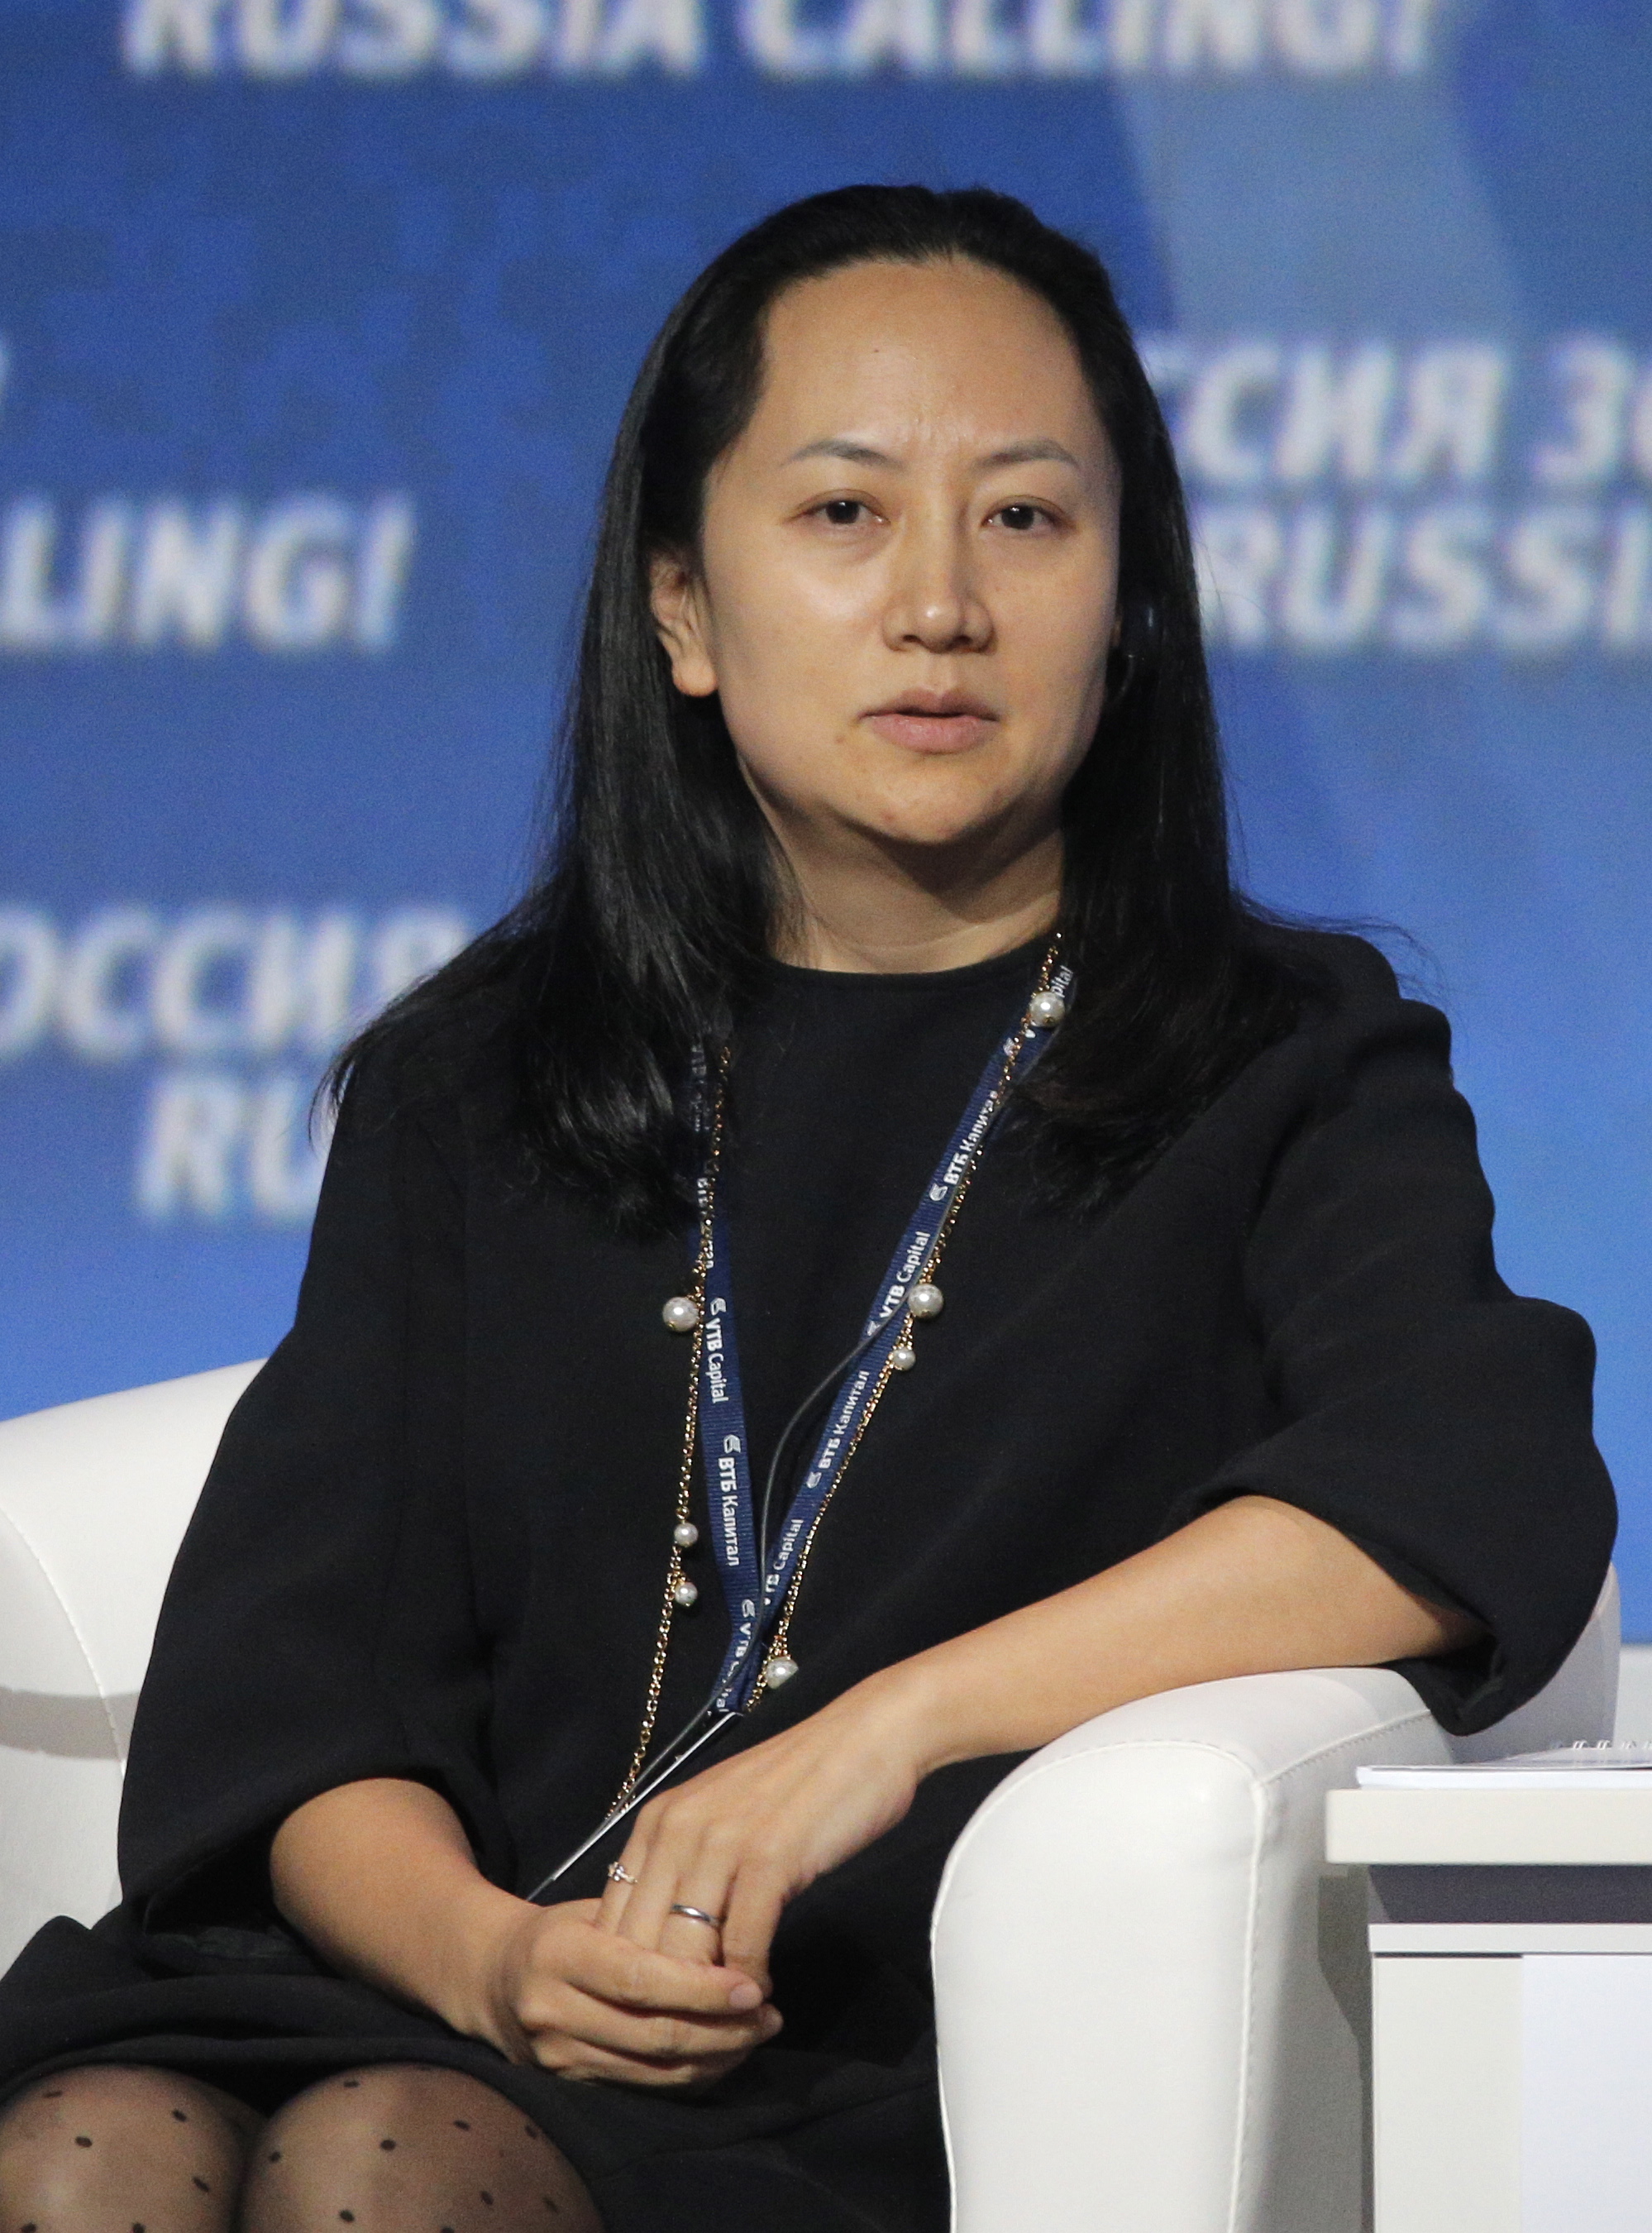 epa07211367 (FILE) - Meng Wanzhou, Chief Financial Officer of Huawei, attends the VTB Capital's 'RUSSIA CALLING' investment forum in Moscow, Russia, 02 October 2014 (reissued 06 December 2018). Meng Wanzhou has been arrested in Canada at the request of US authorities. According to US media reports, Meng Wanzhou was detained for potential US sanction violations.  EPA/MAXIM SHIPENKOV